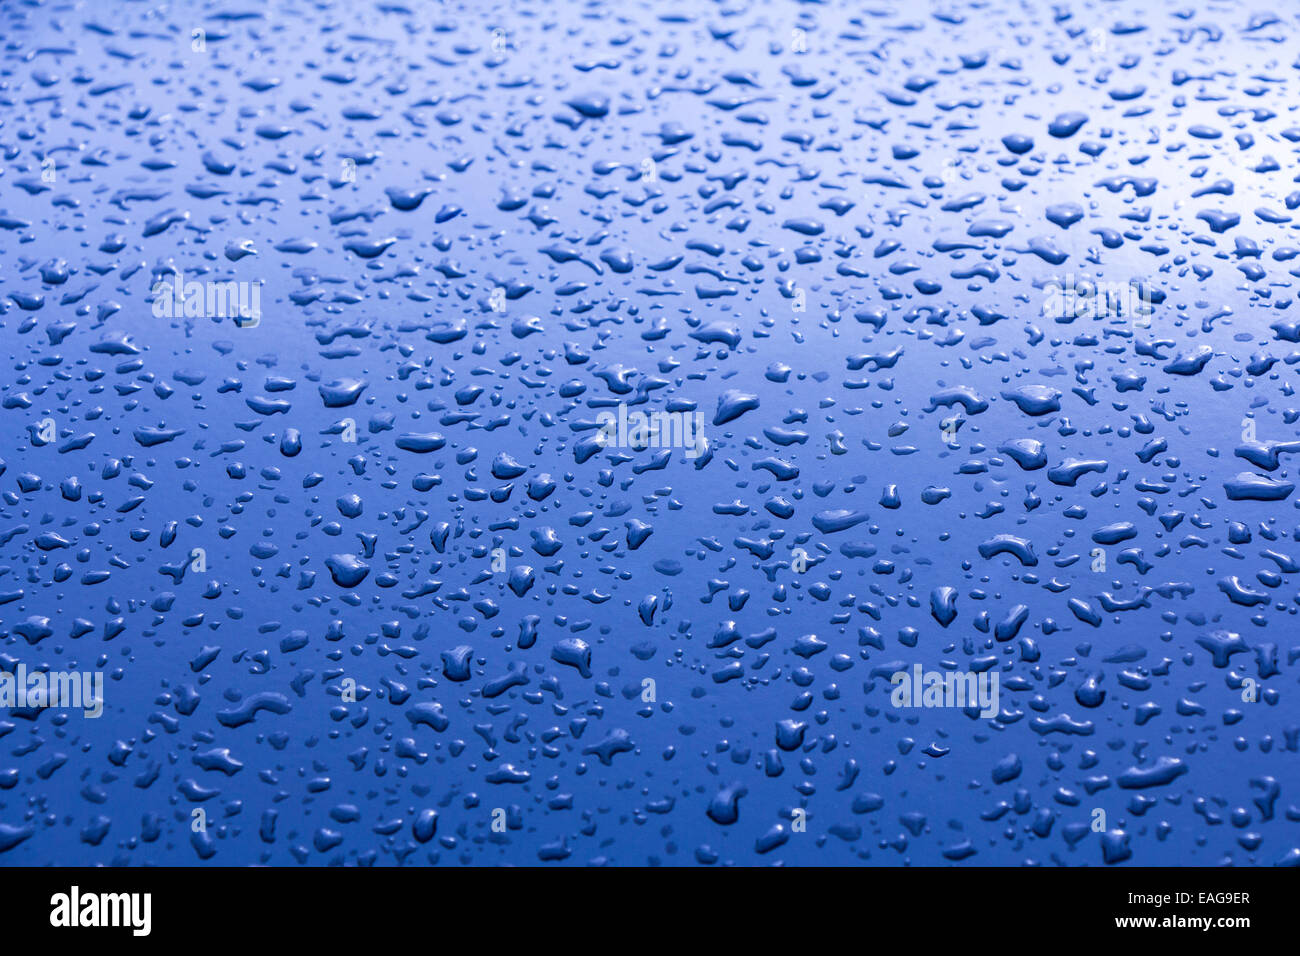 Blue Abstract water drops texture, nature background Stock Photo